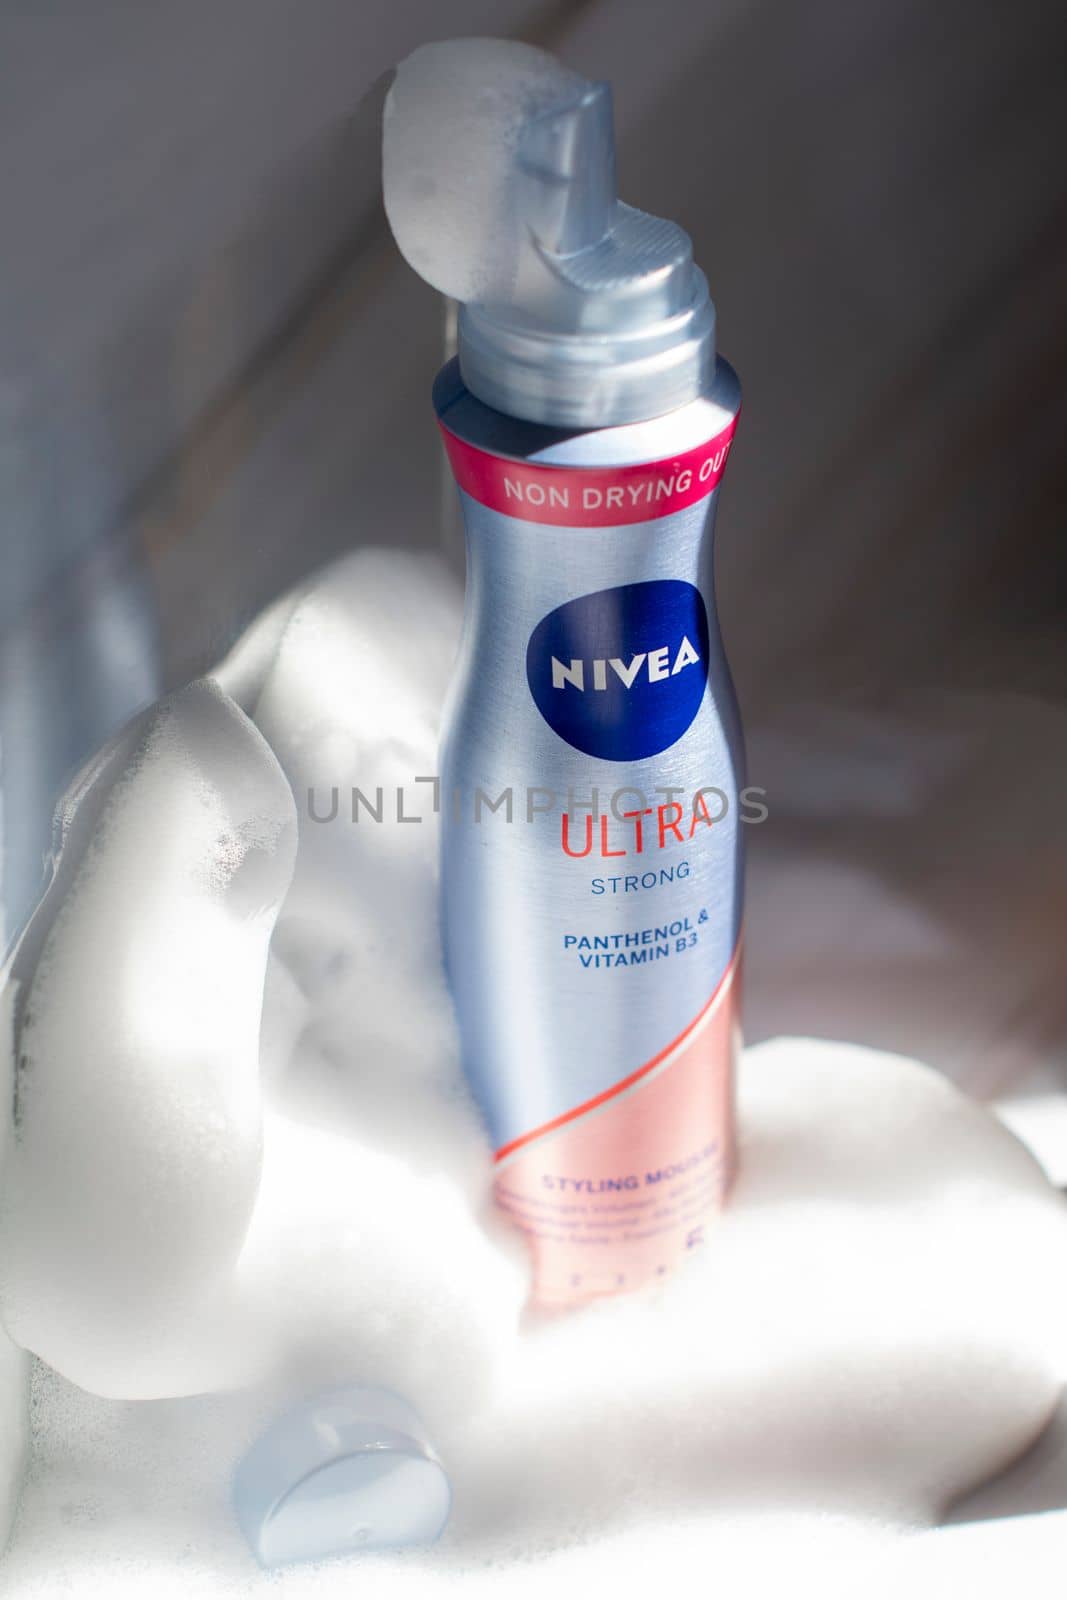 Nivea hair fixing ultra stong styling mousse in foam and sunshine, close-up photo of the product, As,Belgium, Juny 30, 2022, High quality photo,